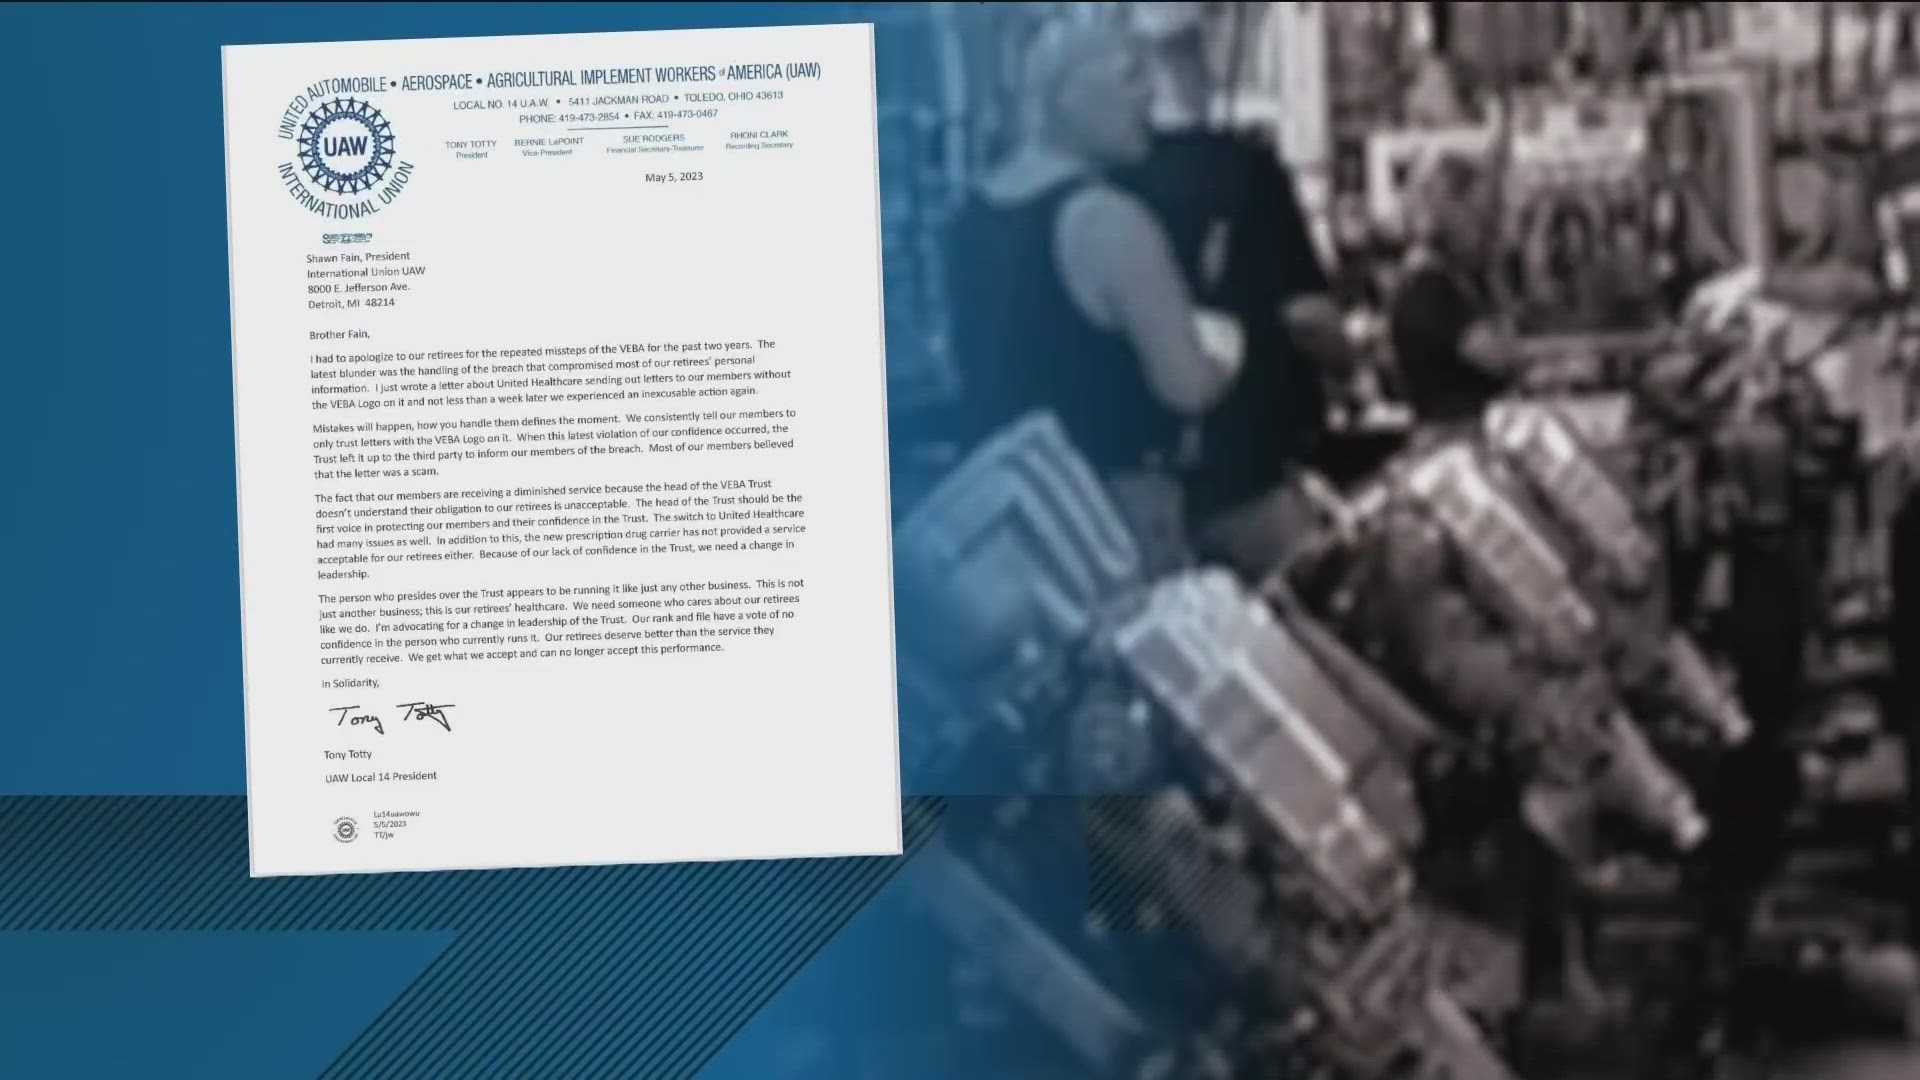 UAW Local 14 president Tony Totty said retired auto workers' personal information was compromised in January and the notification looked like a scam letter.